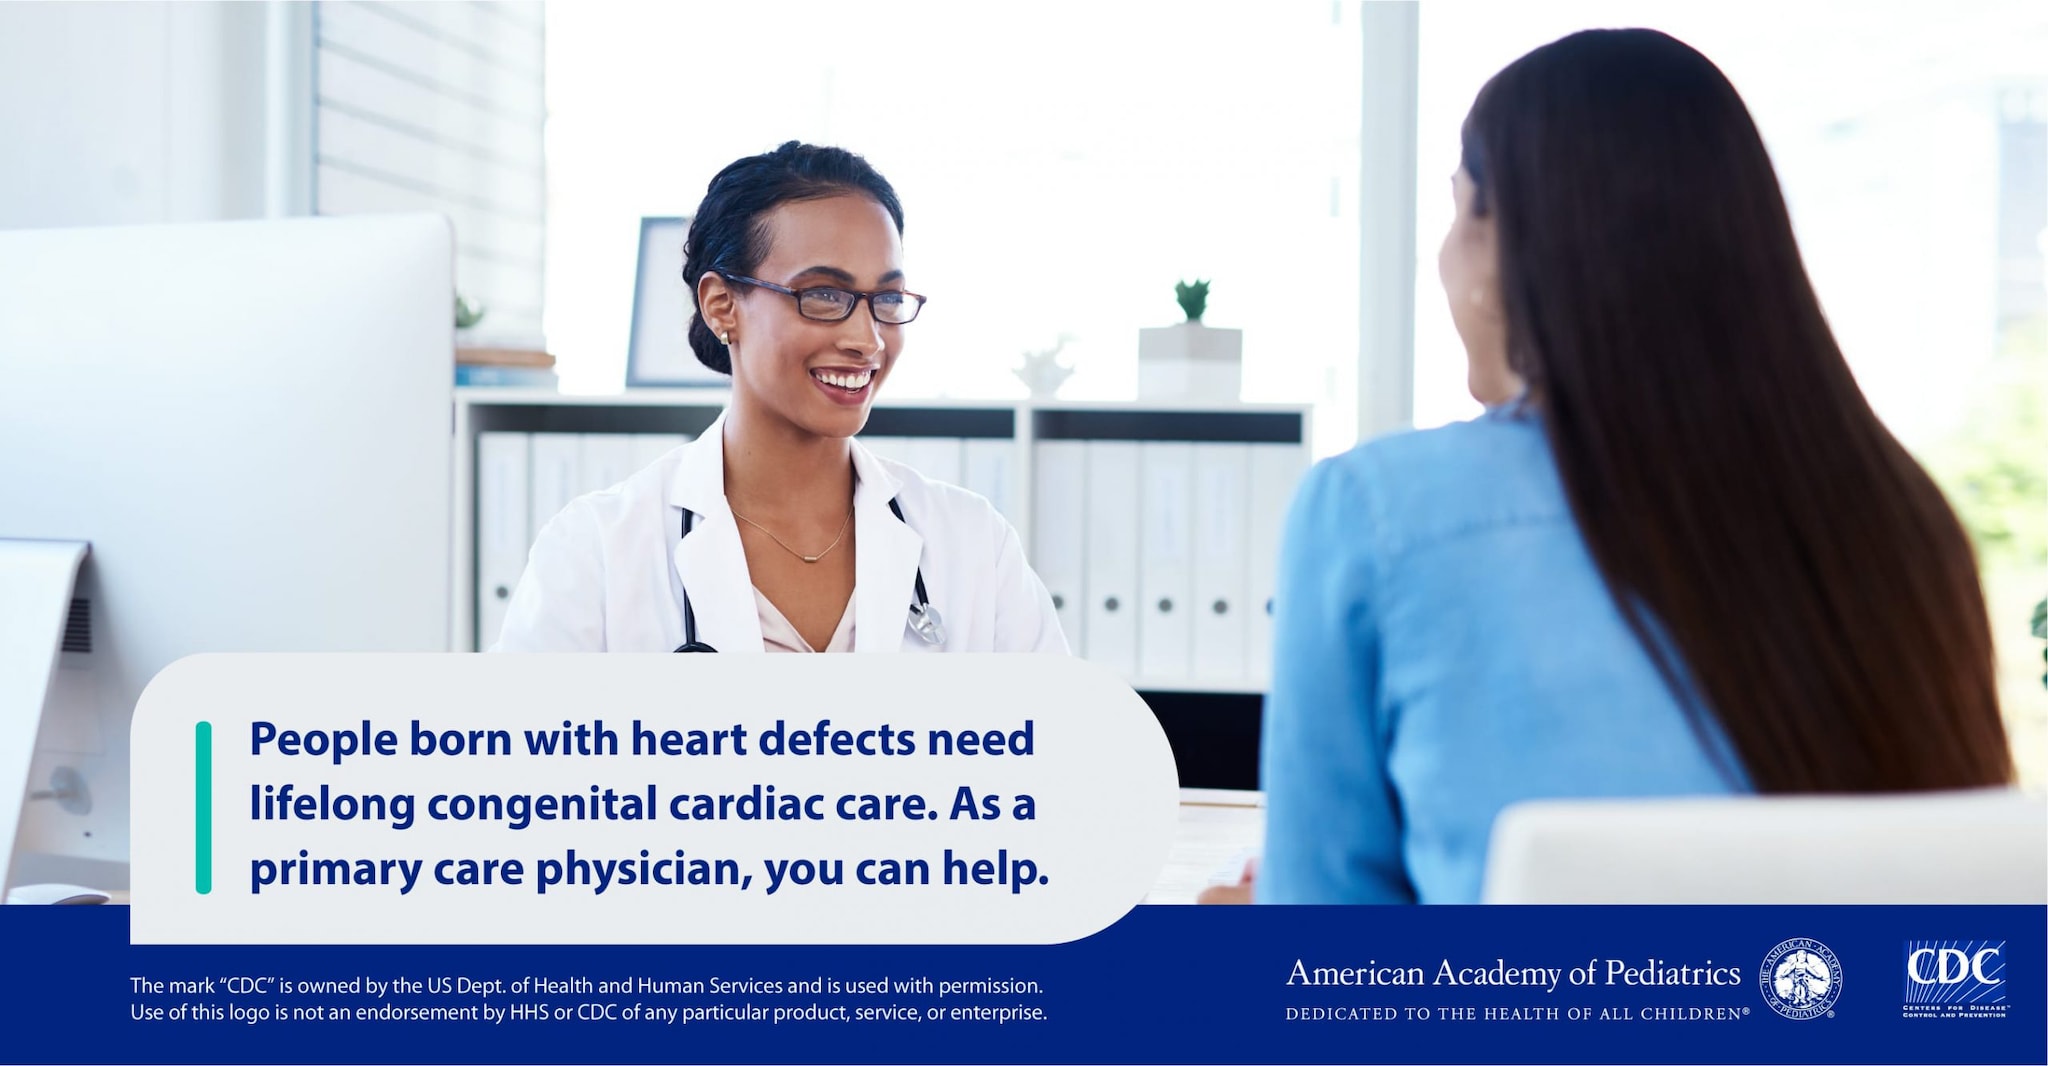 The background shows a person talking with a doctor and the foreground includes this text "People born with heart defects need lifelong congenital cardiac care. As a primary care physician, you can help."